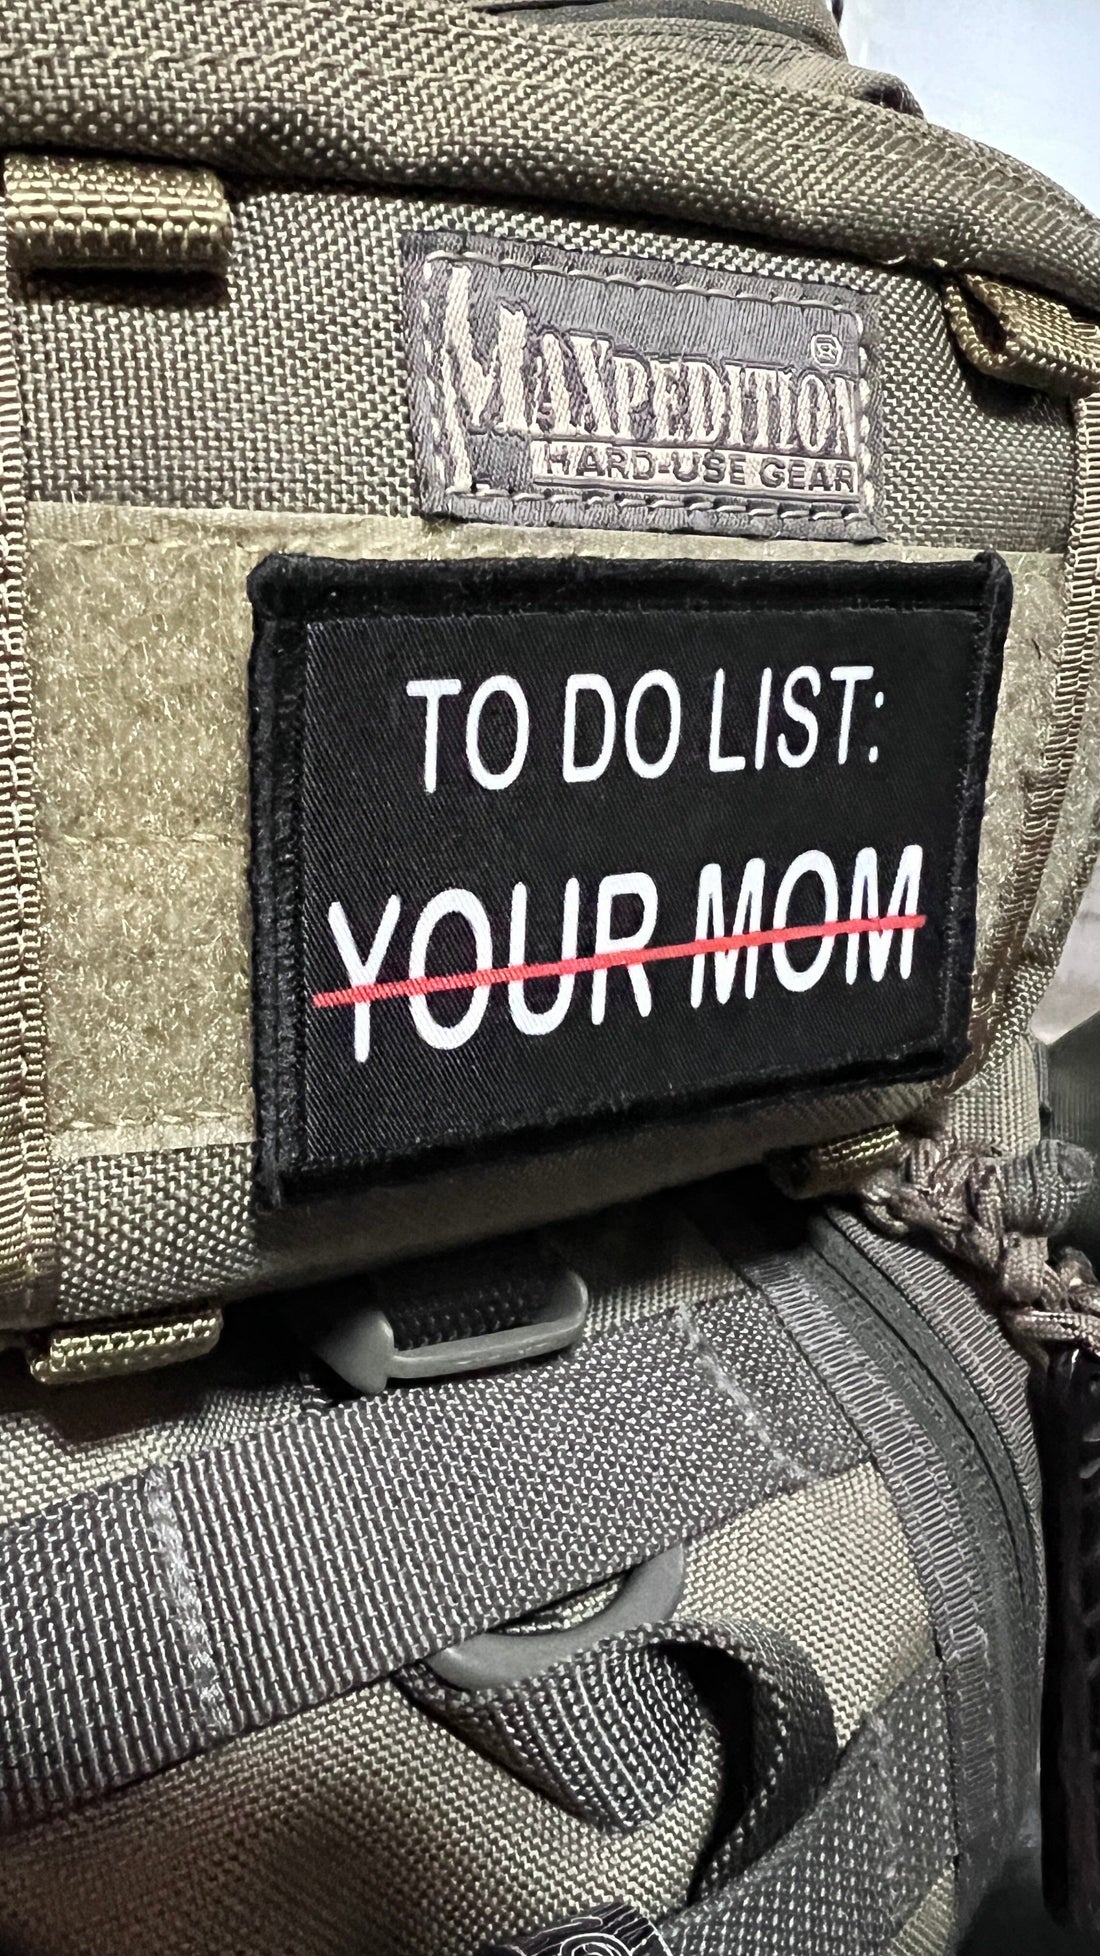 Inject Some Humor into Your Patch Collection with the 2x3" "To List: Your Mom" Morale Patch from RedHeadedTshirts.com